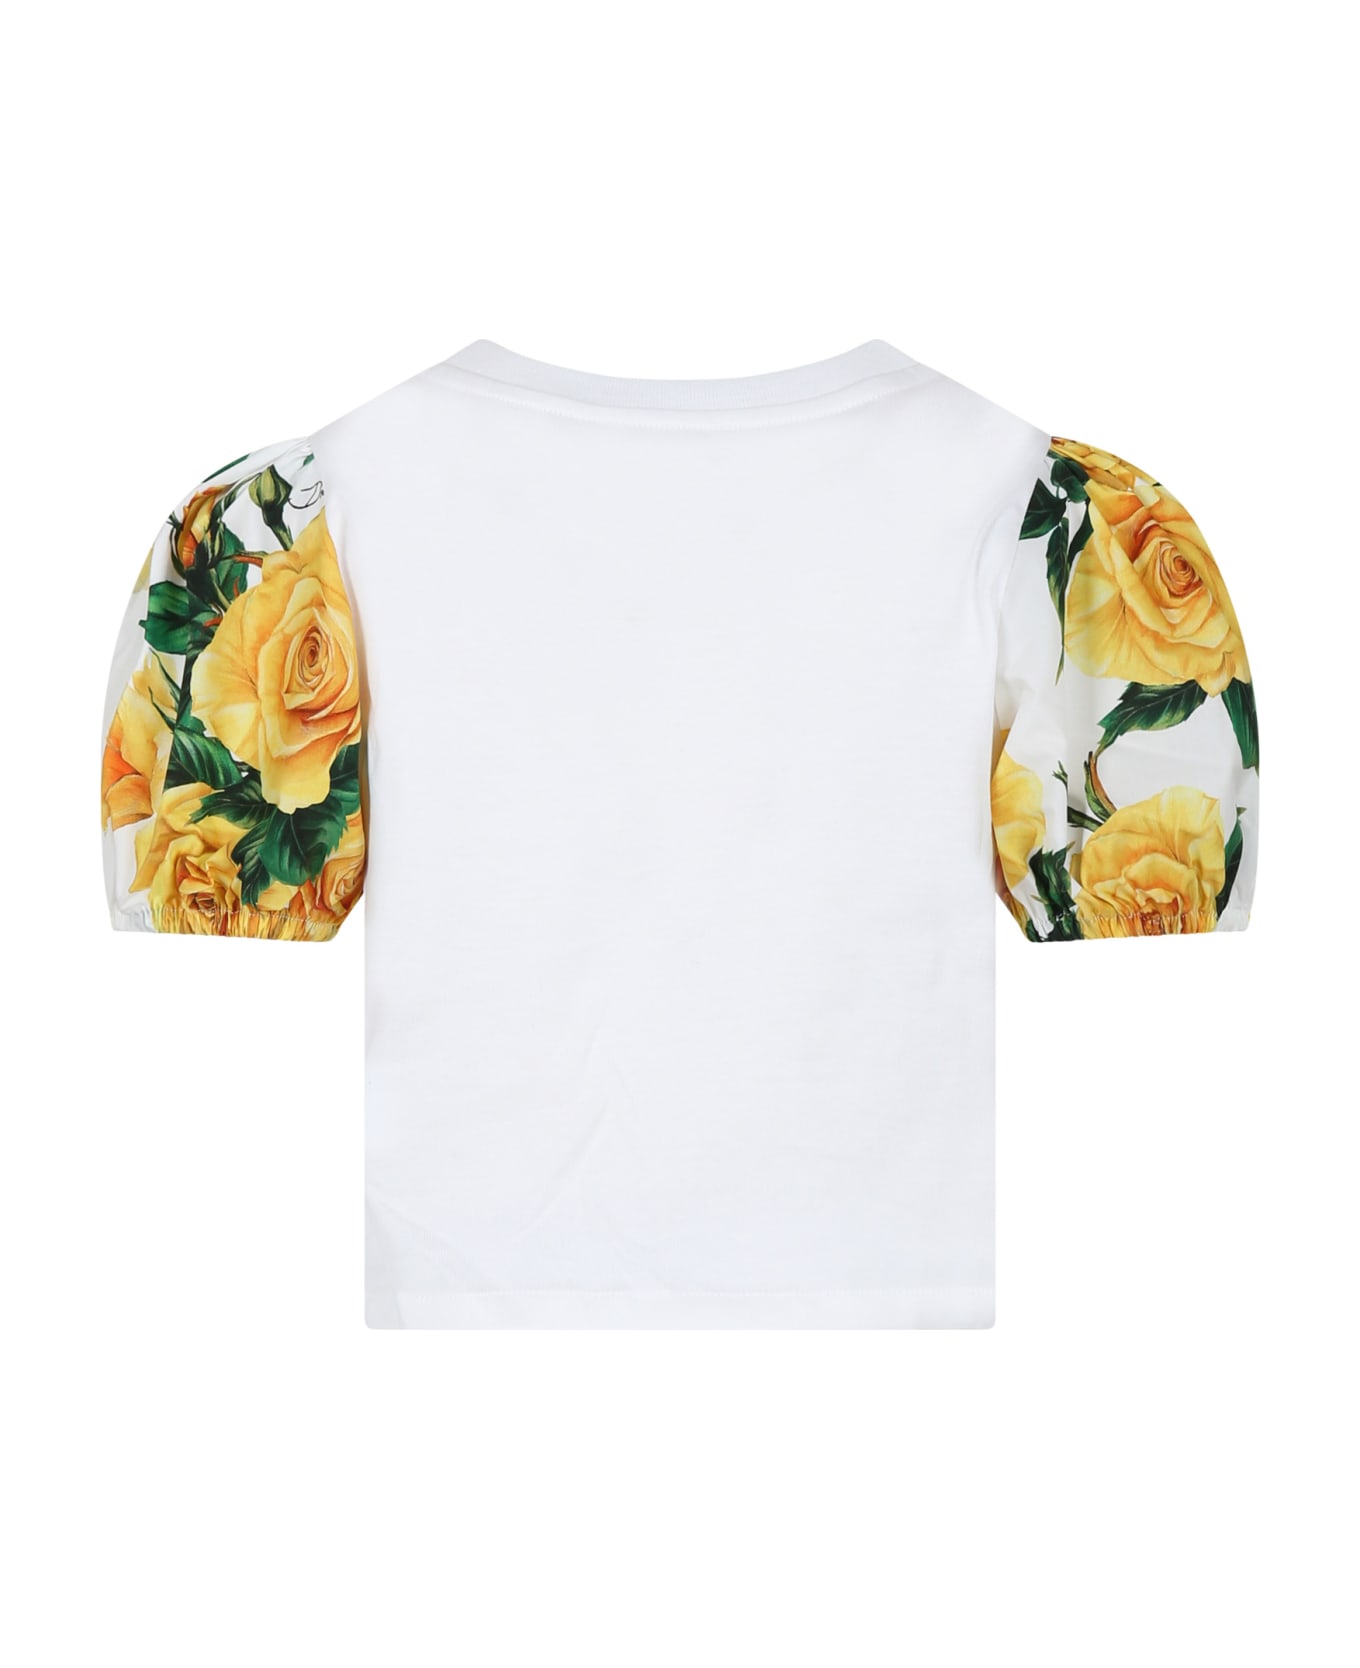 Dolce & Gabbana White T-shirt For Girl With Flowering Pattern - MULTICOLOR